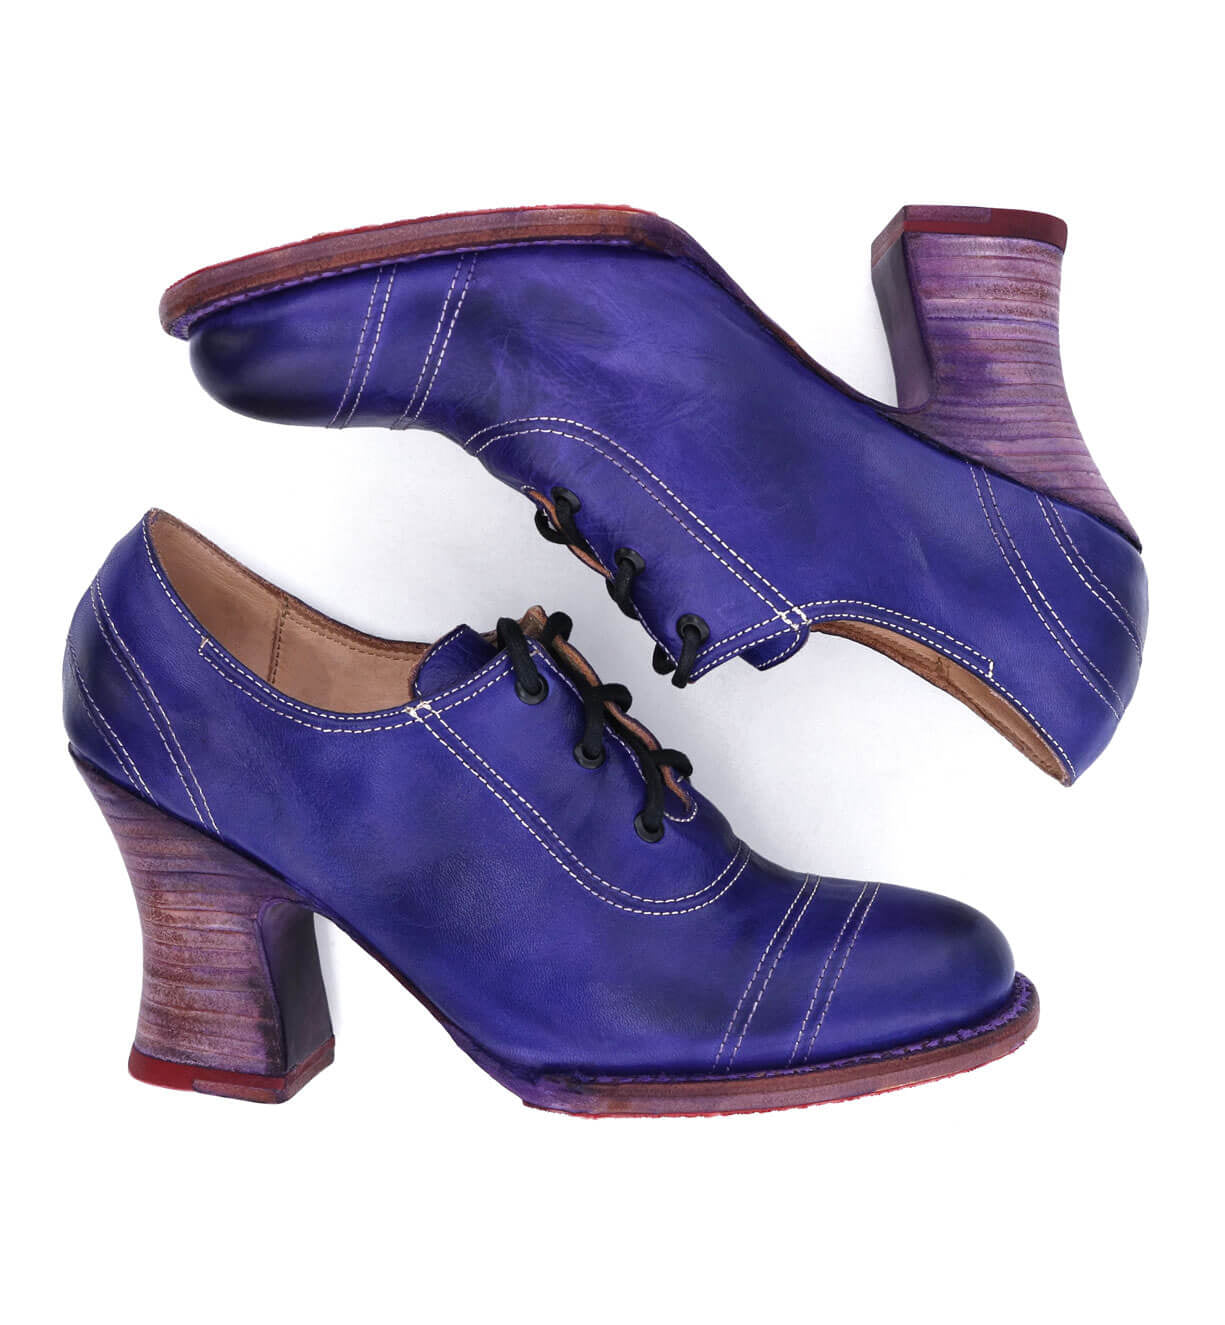 A pair of enchanting Nanny shoes with Oak Tree Farms wooden heels.